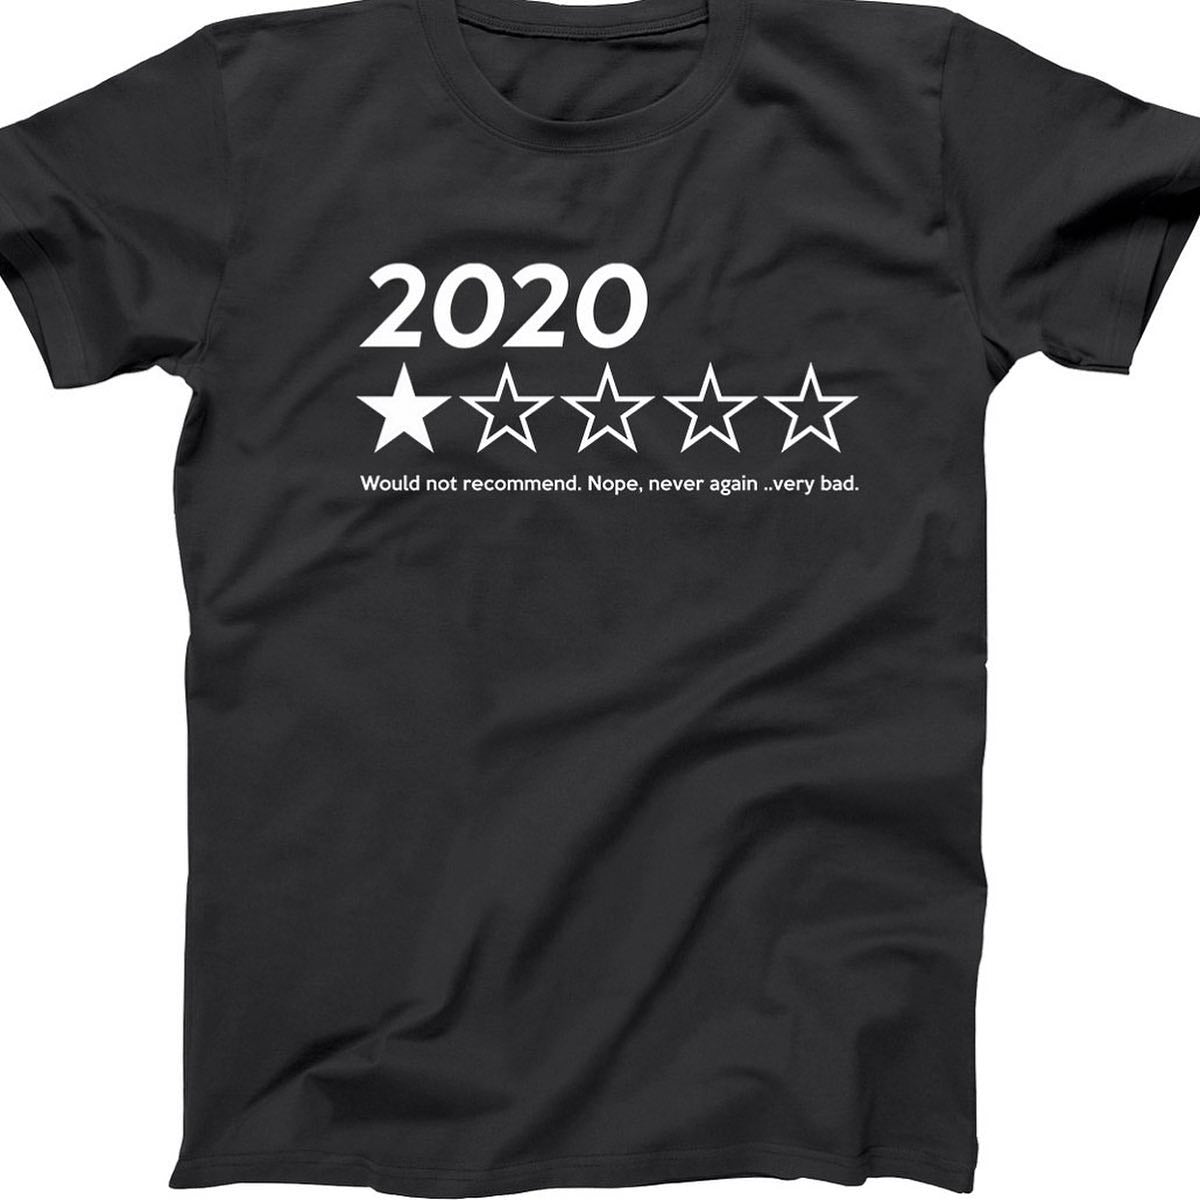 👉 If 2020 had a...